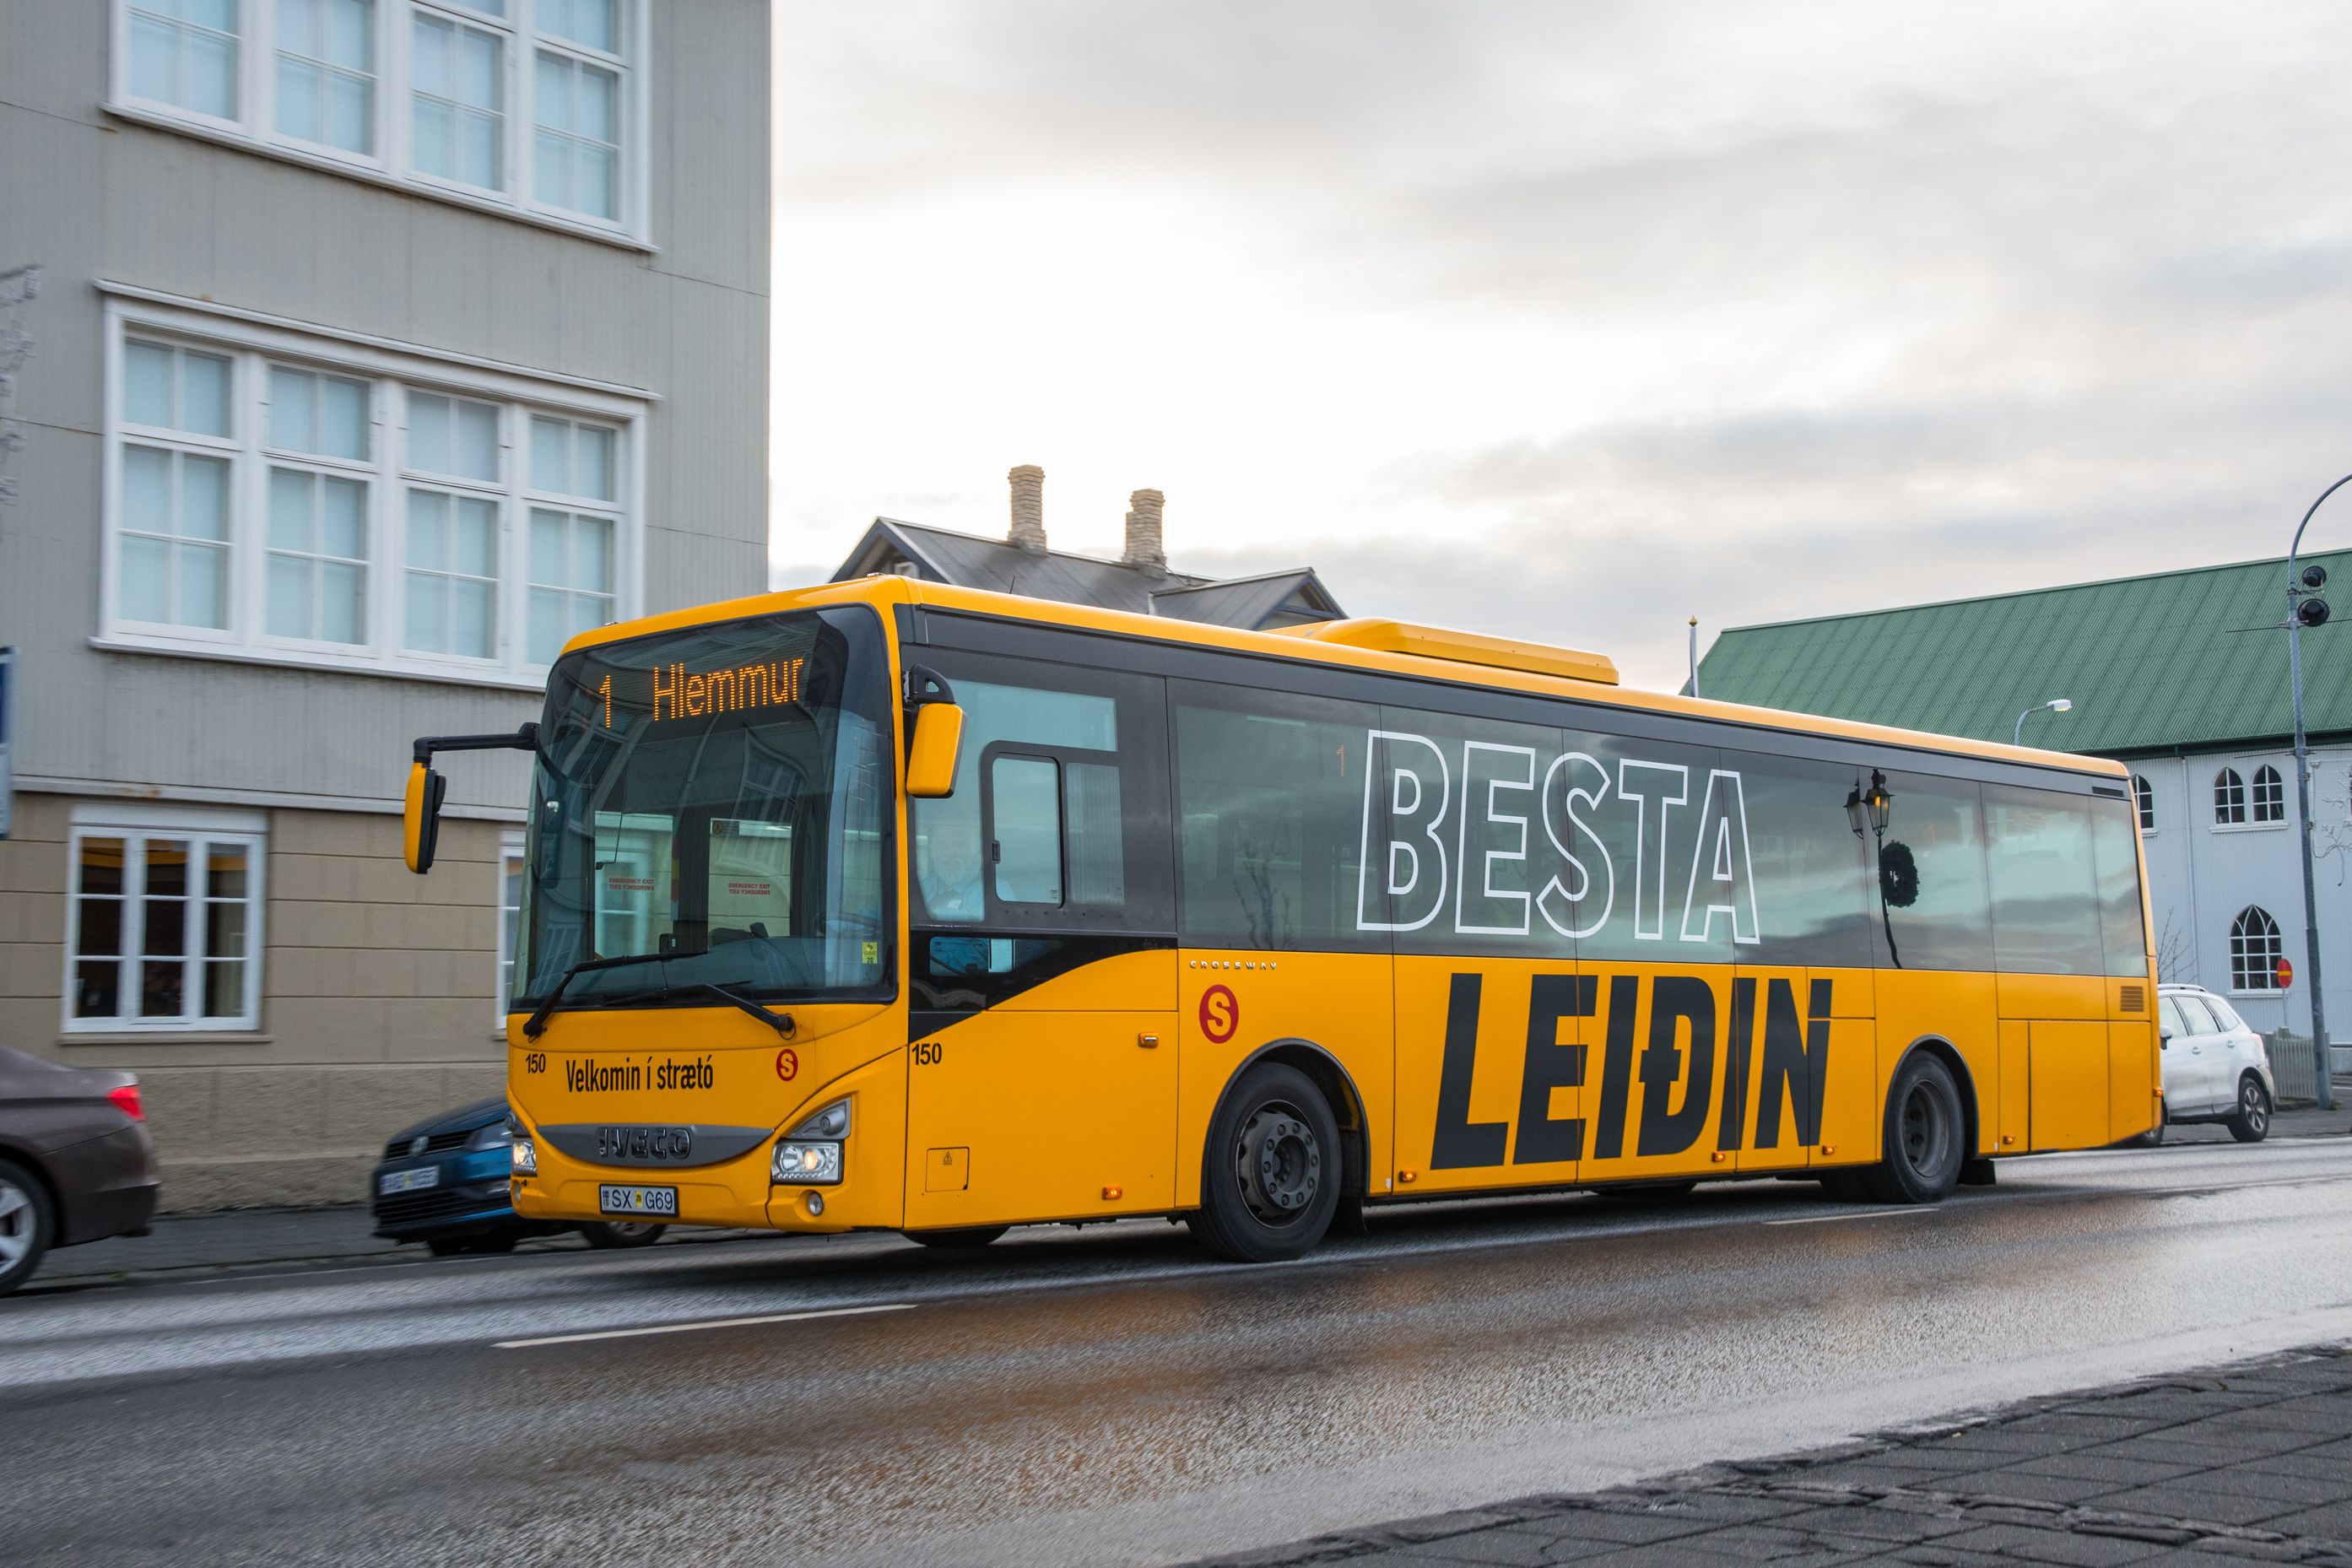 A Public Transportation bus in iceland